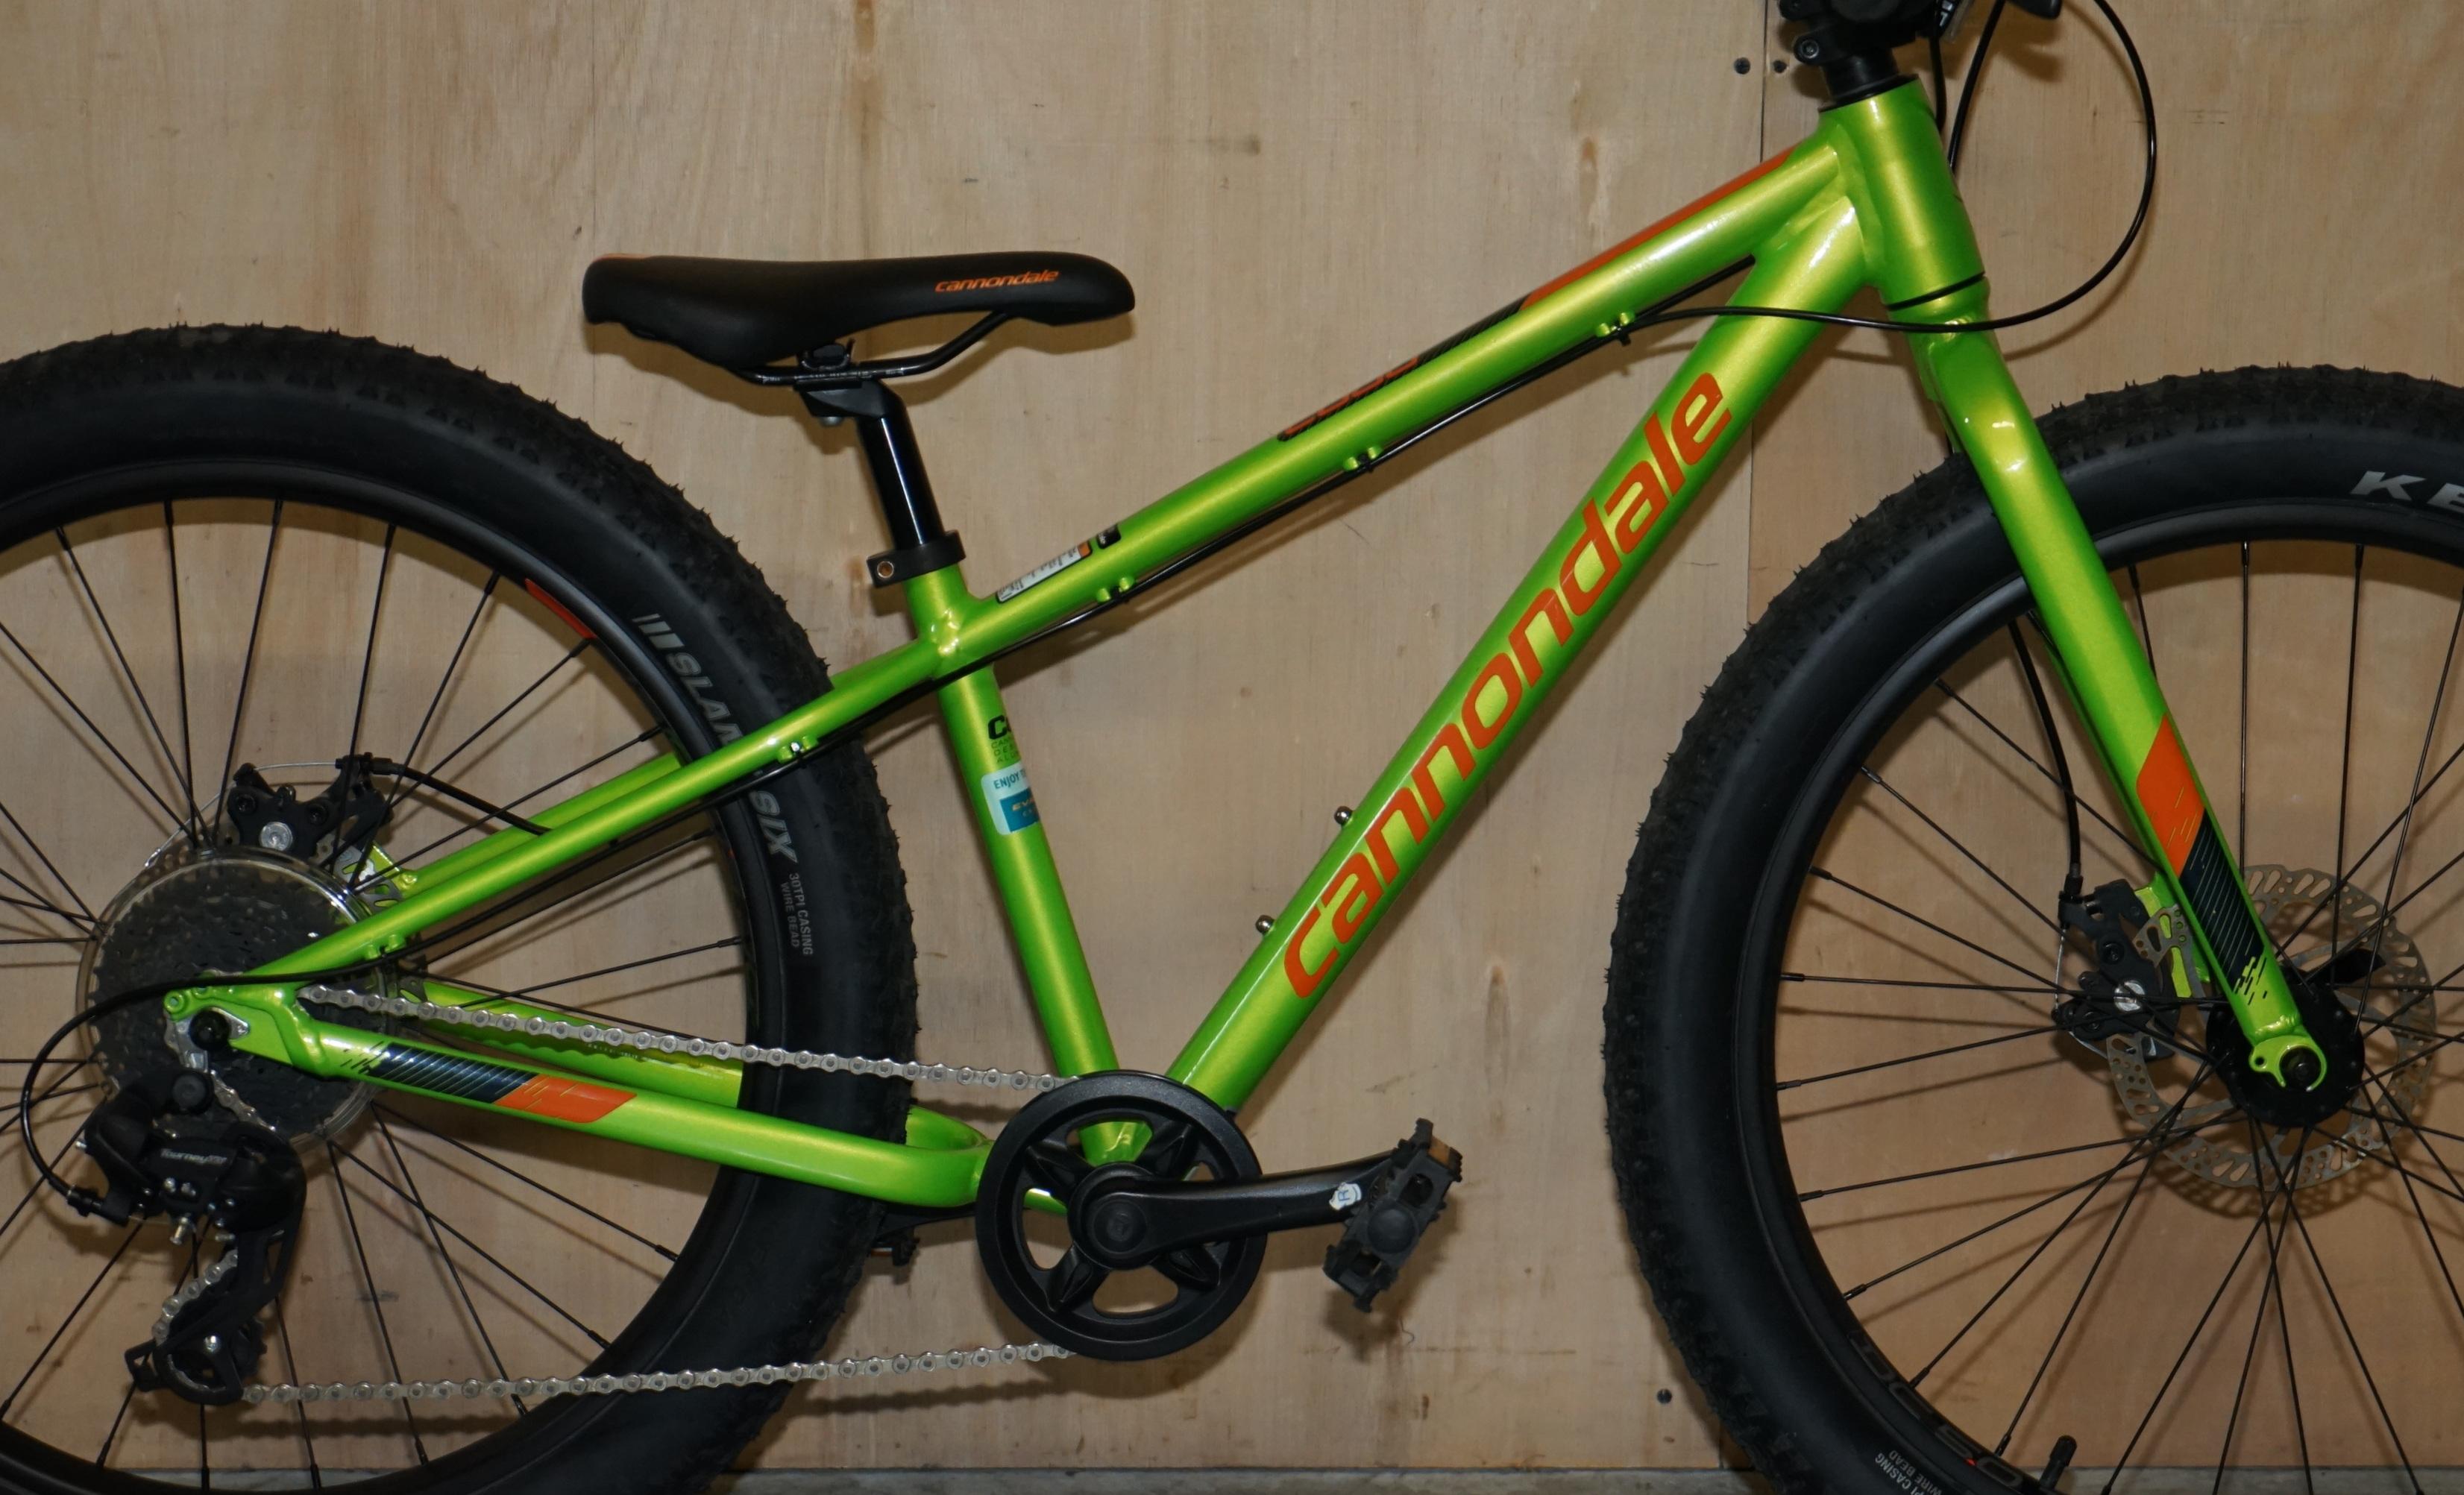 We are delighted to offer for sale this new old ex shop display Children's Cannondale Cujo 24 inch wheel Fat Bike

This bike I had in my old bike shop for my son, he never learned to ride so never used it, its sat as the day it was built in one of